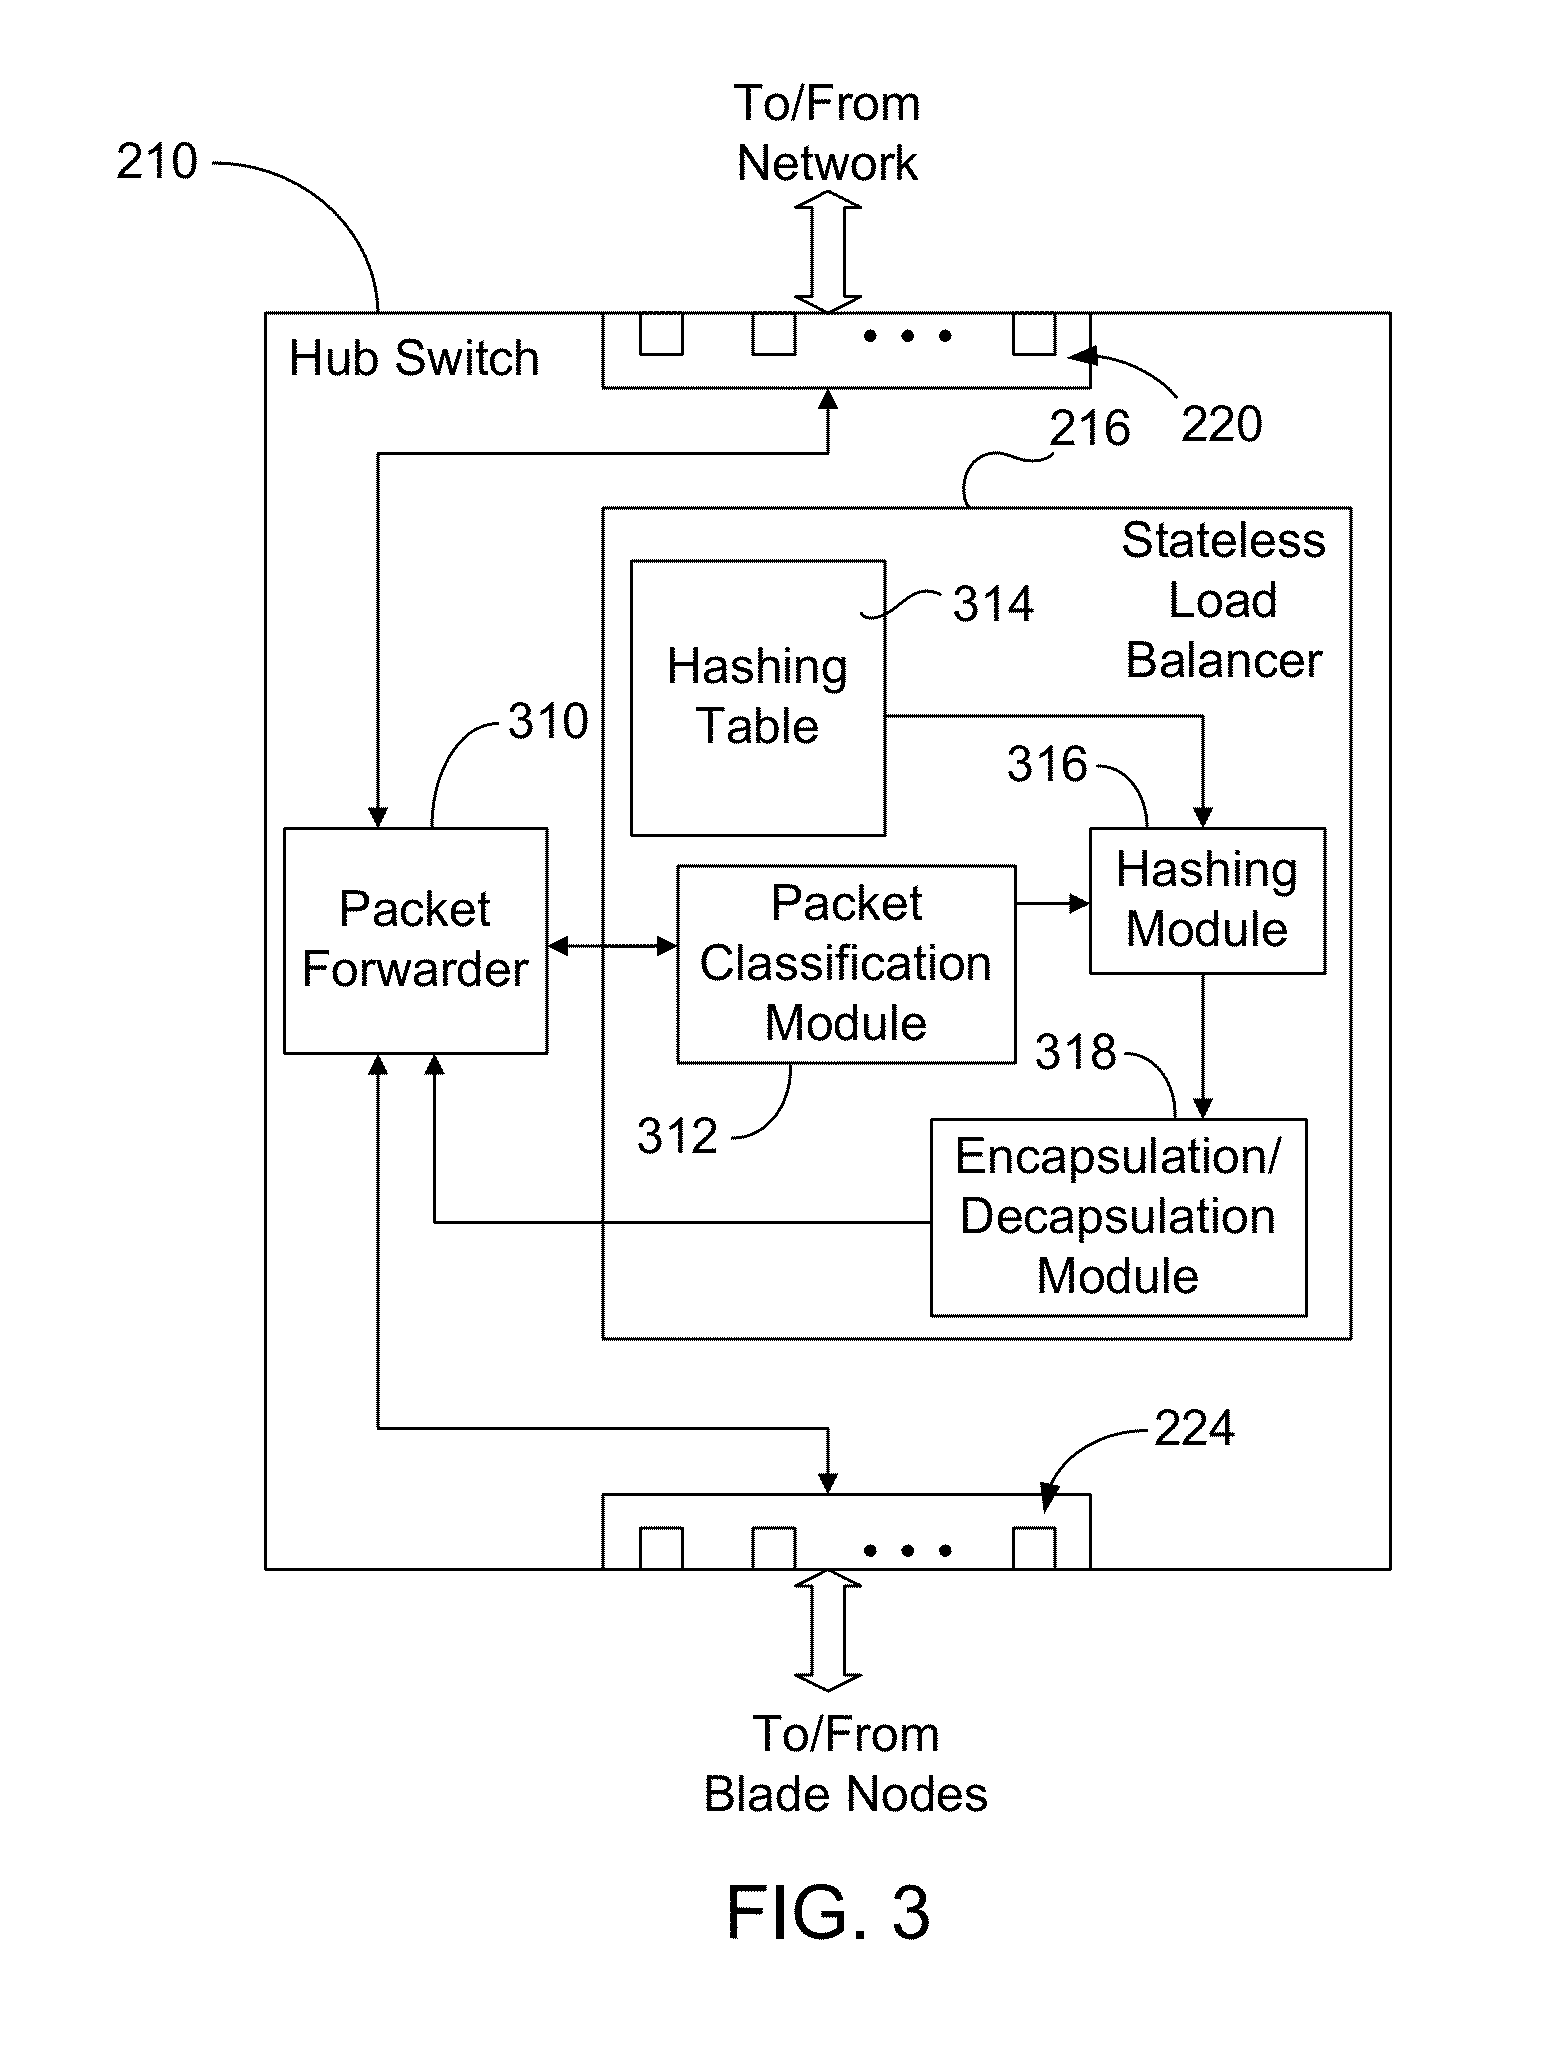 Stateless load balancer in a multi-node system for transparent processing with packet preservation